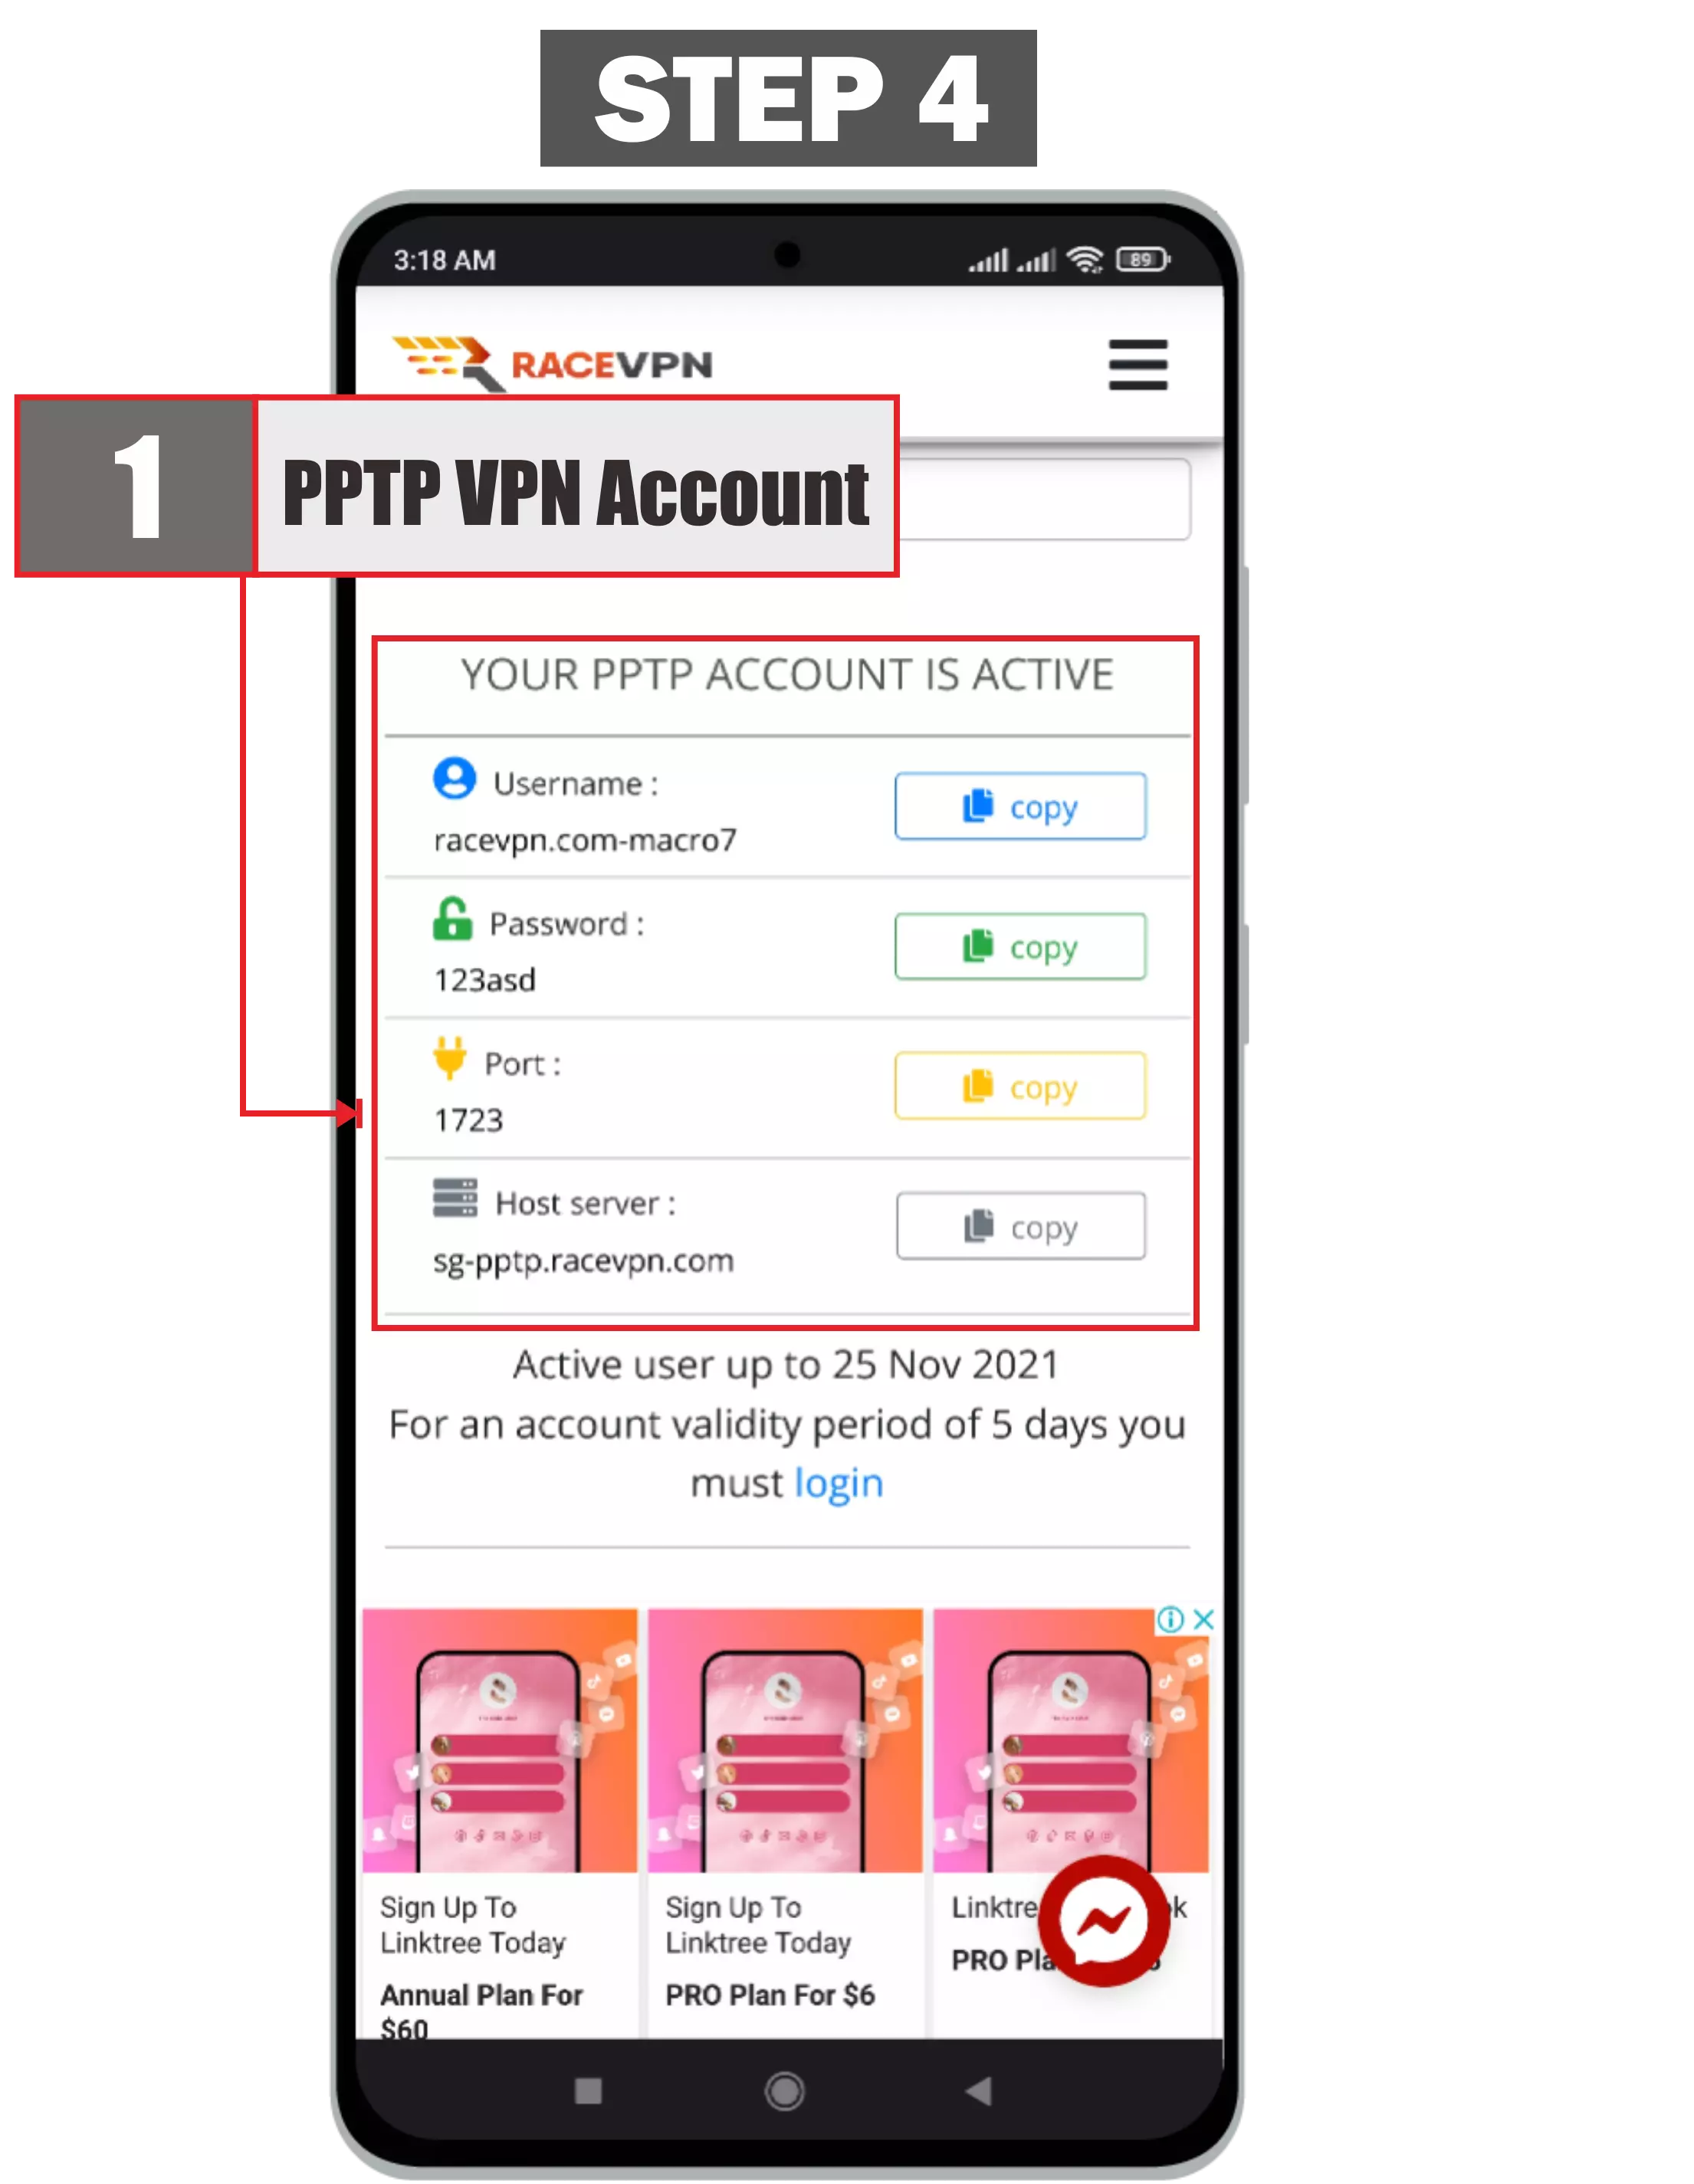 The fourth step is how to use pptp vpn on android